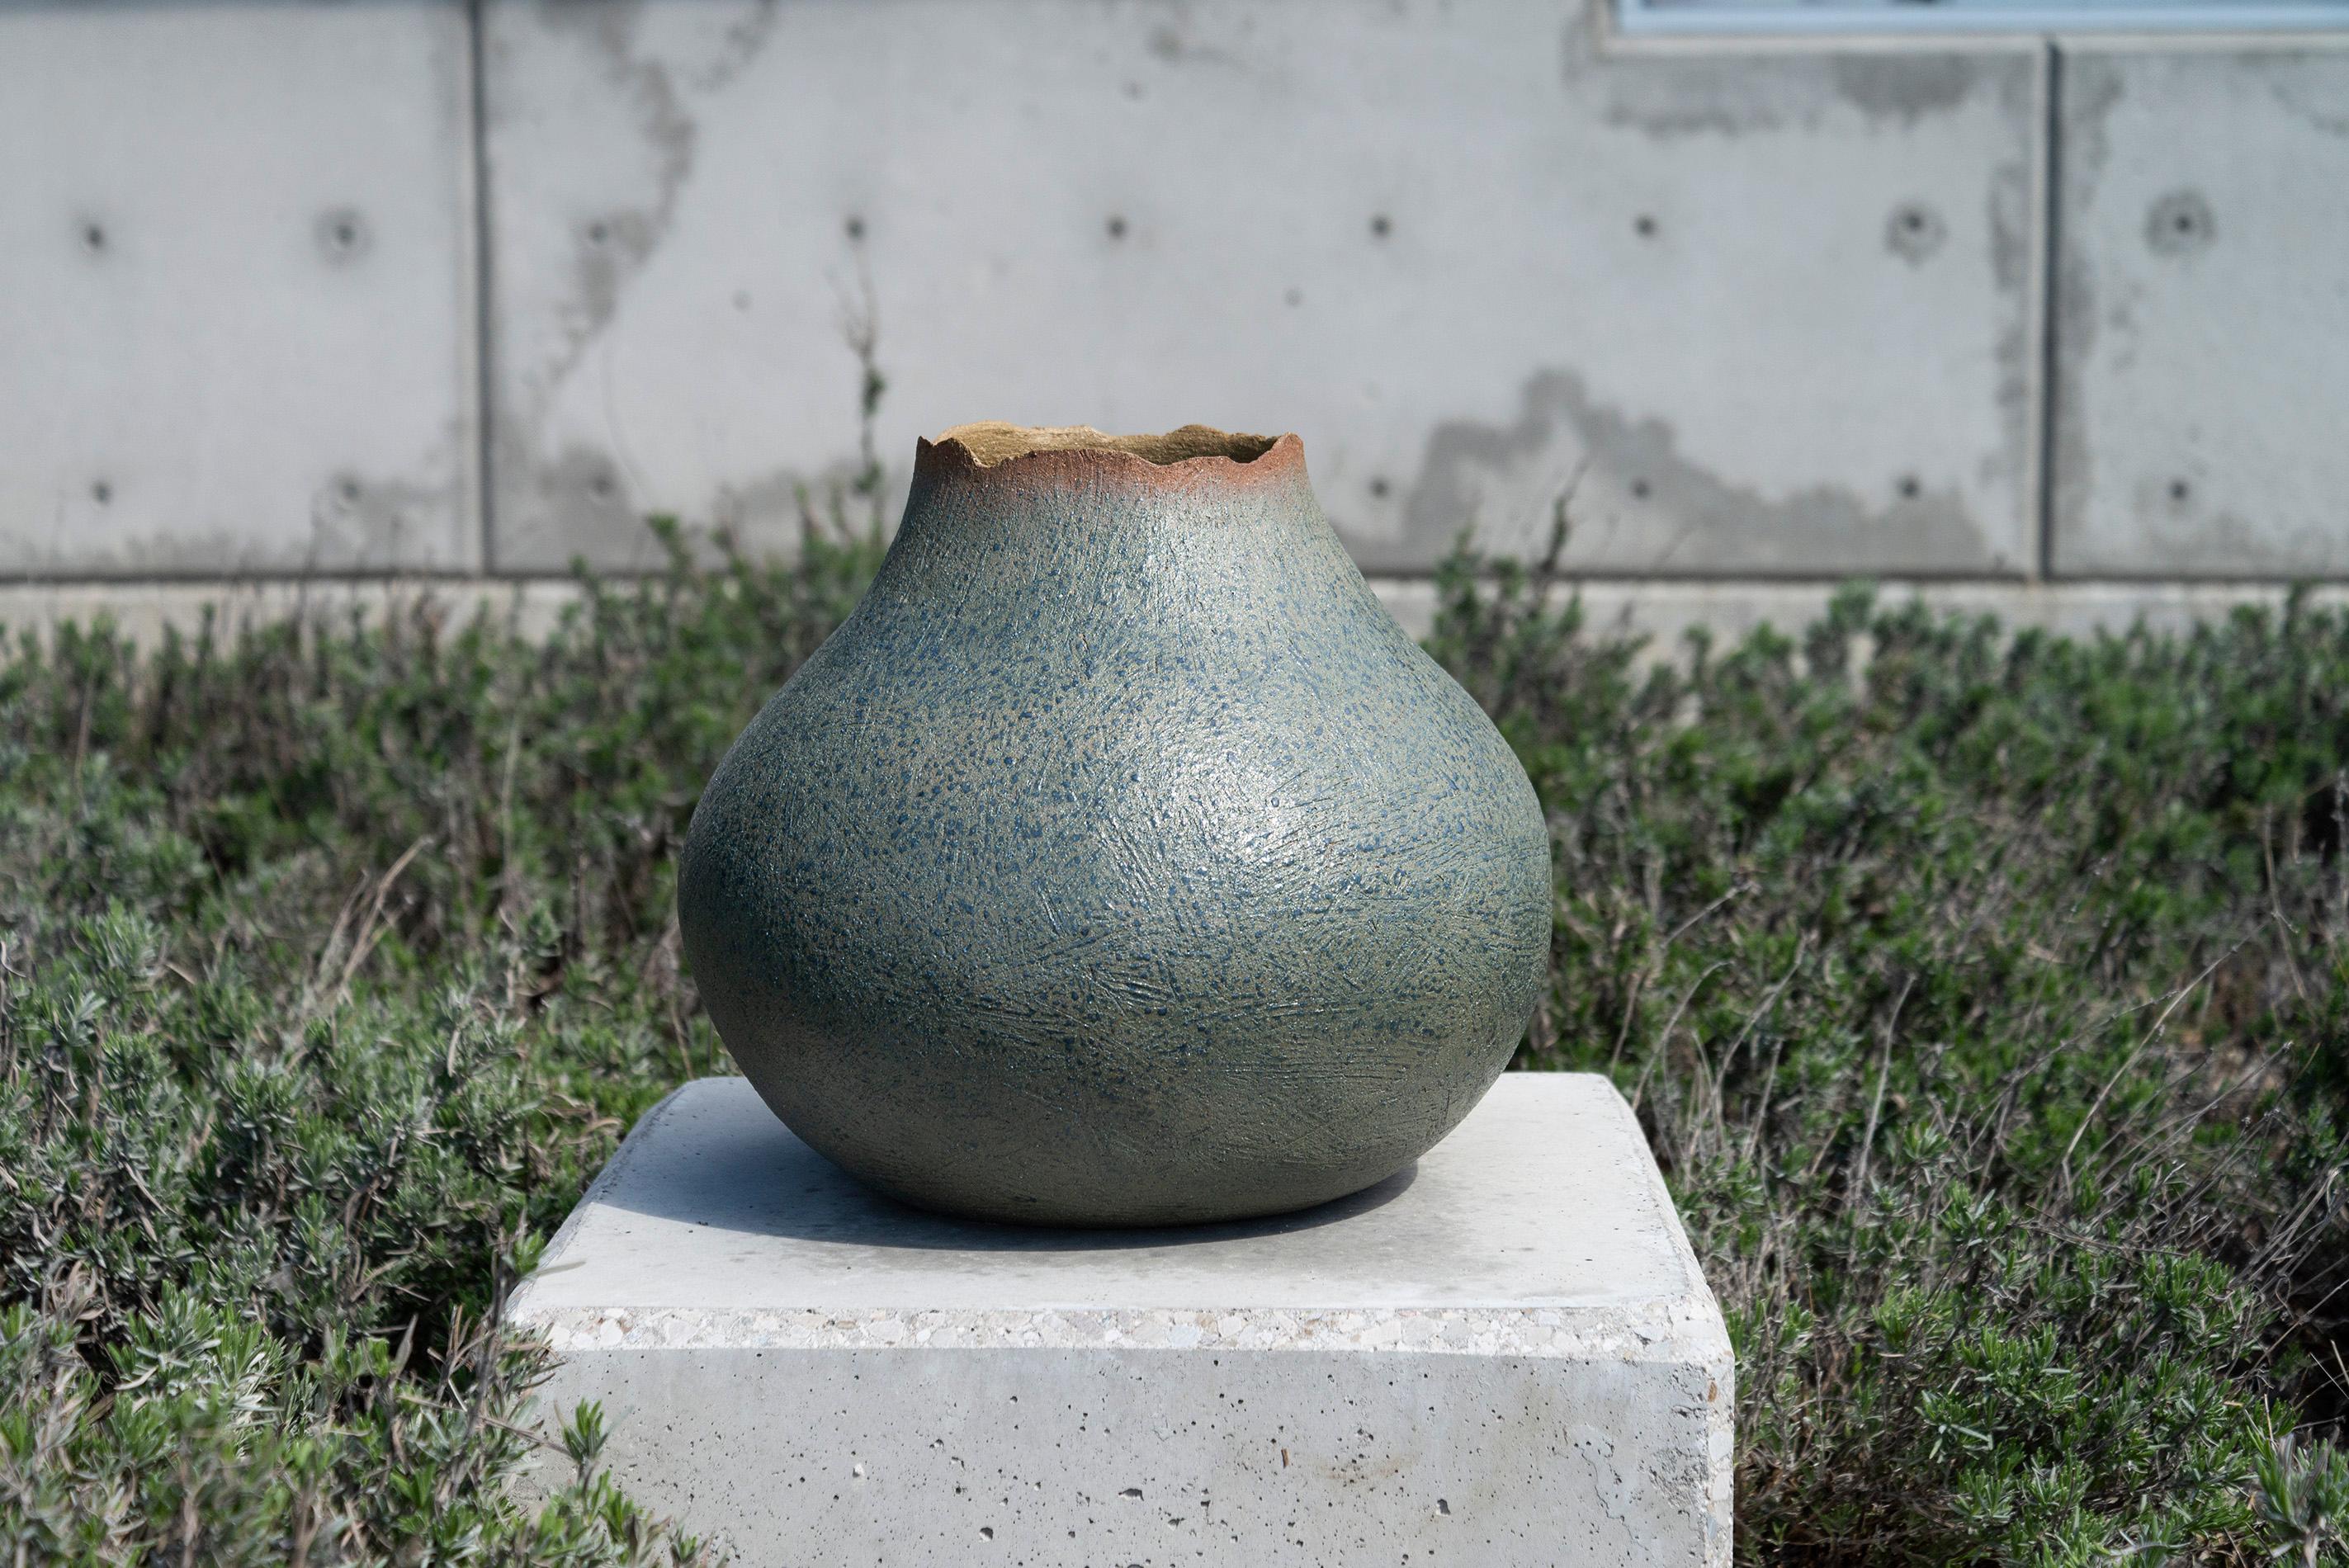 Large Outdoor Vessel No 1 - glazed, outdoor, ceramic, snake and vessel sculpture - Sculpture by Bill Greaves